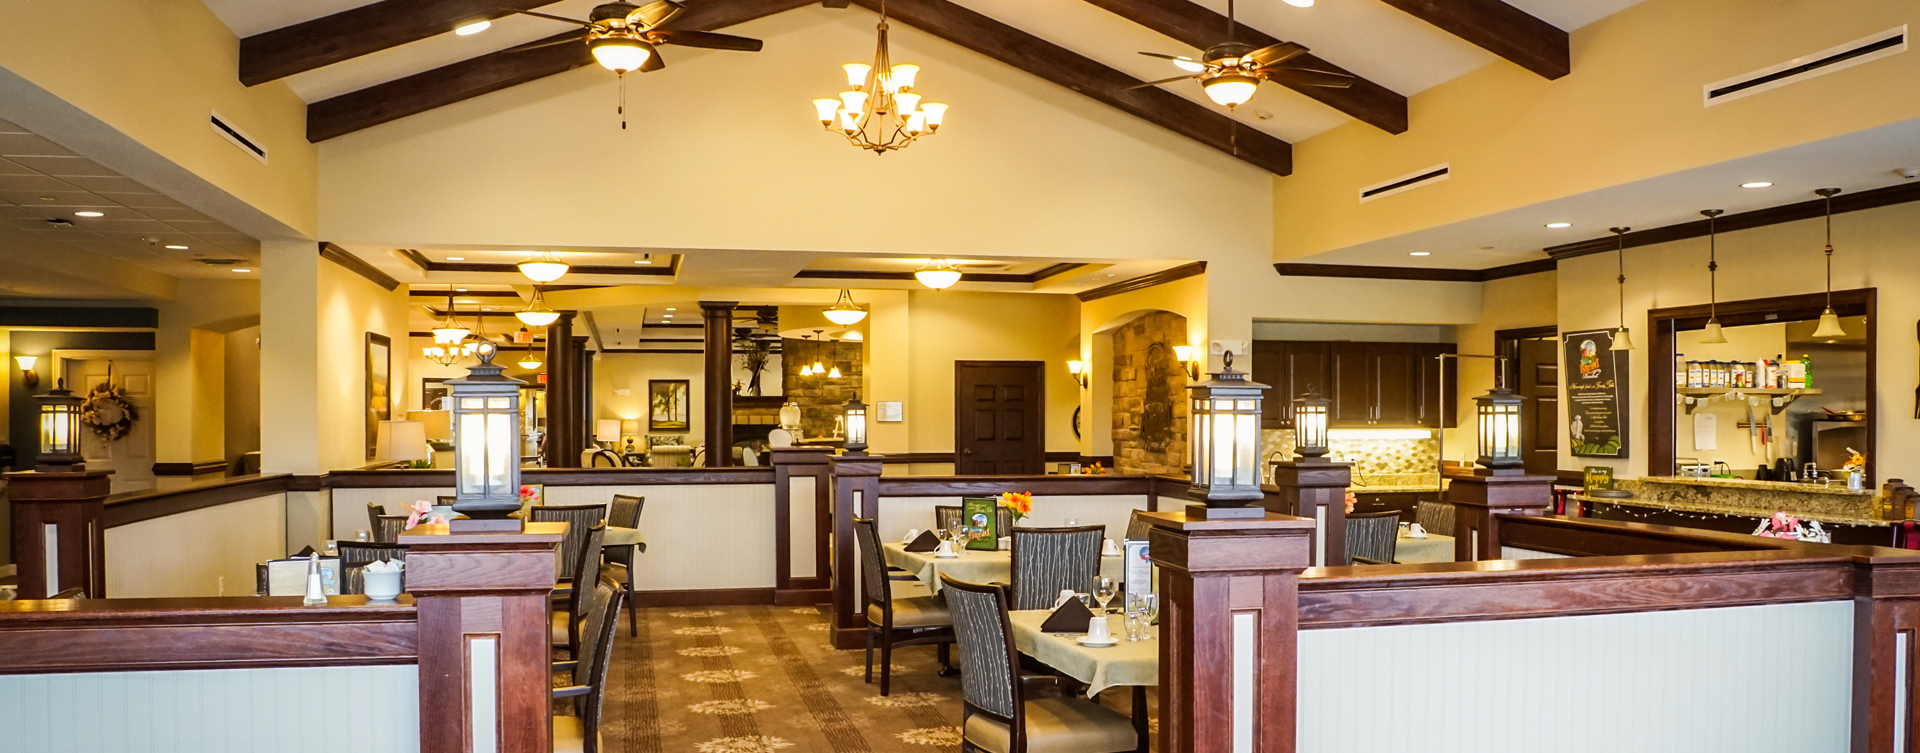 Enjoy homestyle food with made-from-scratch recipes in our dining room at Bickford of Aurora